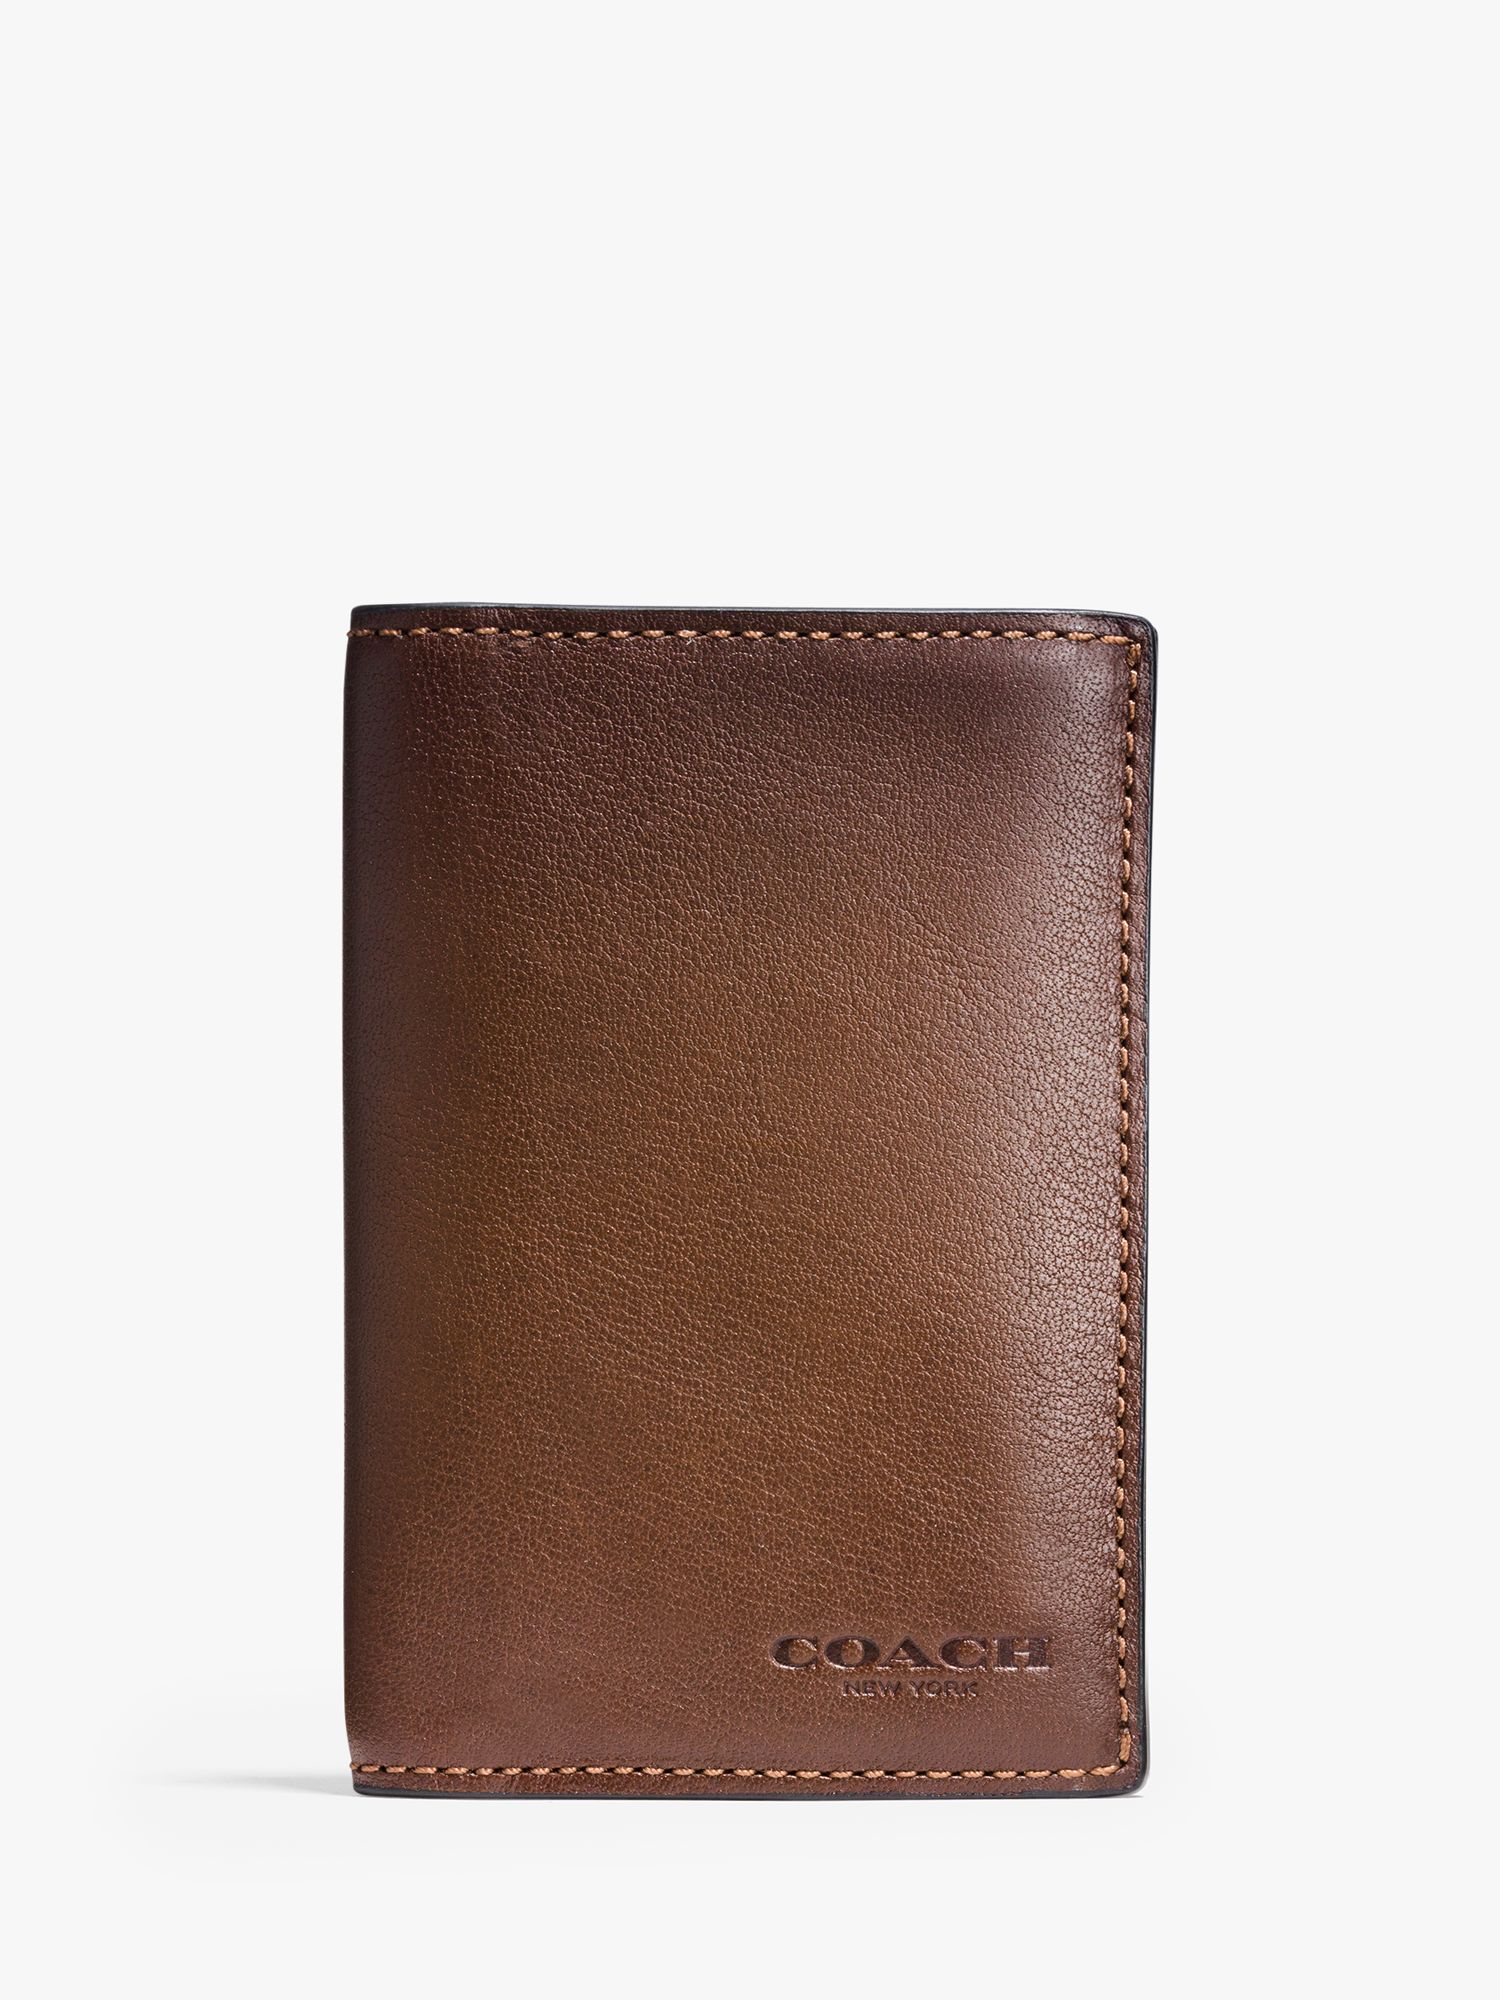 Coach Leather Bifold Card Case, Brown